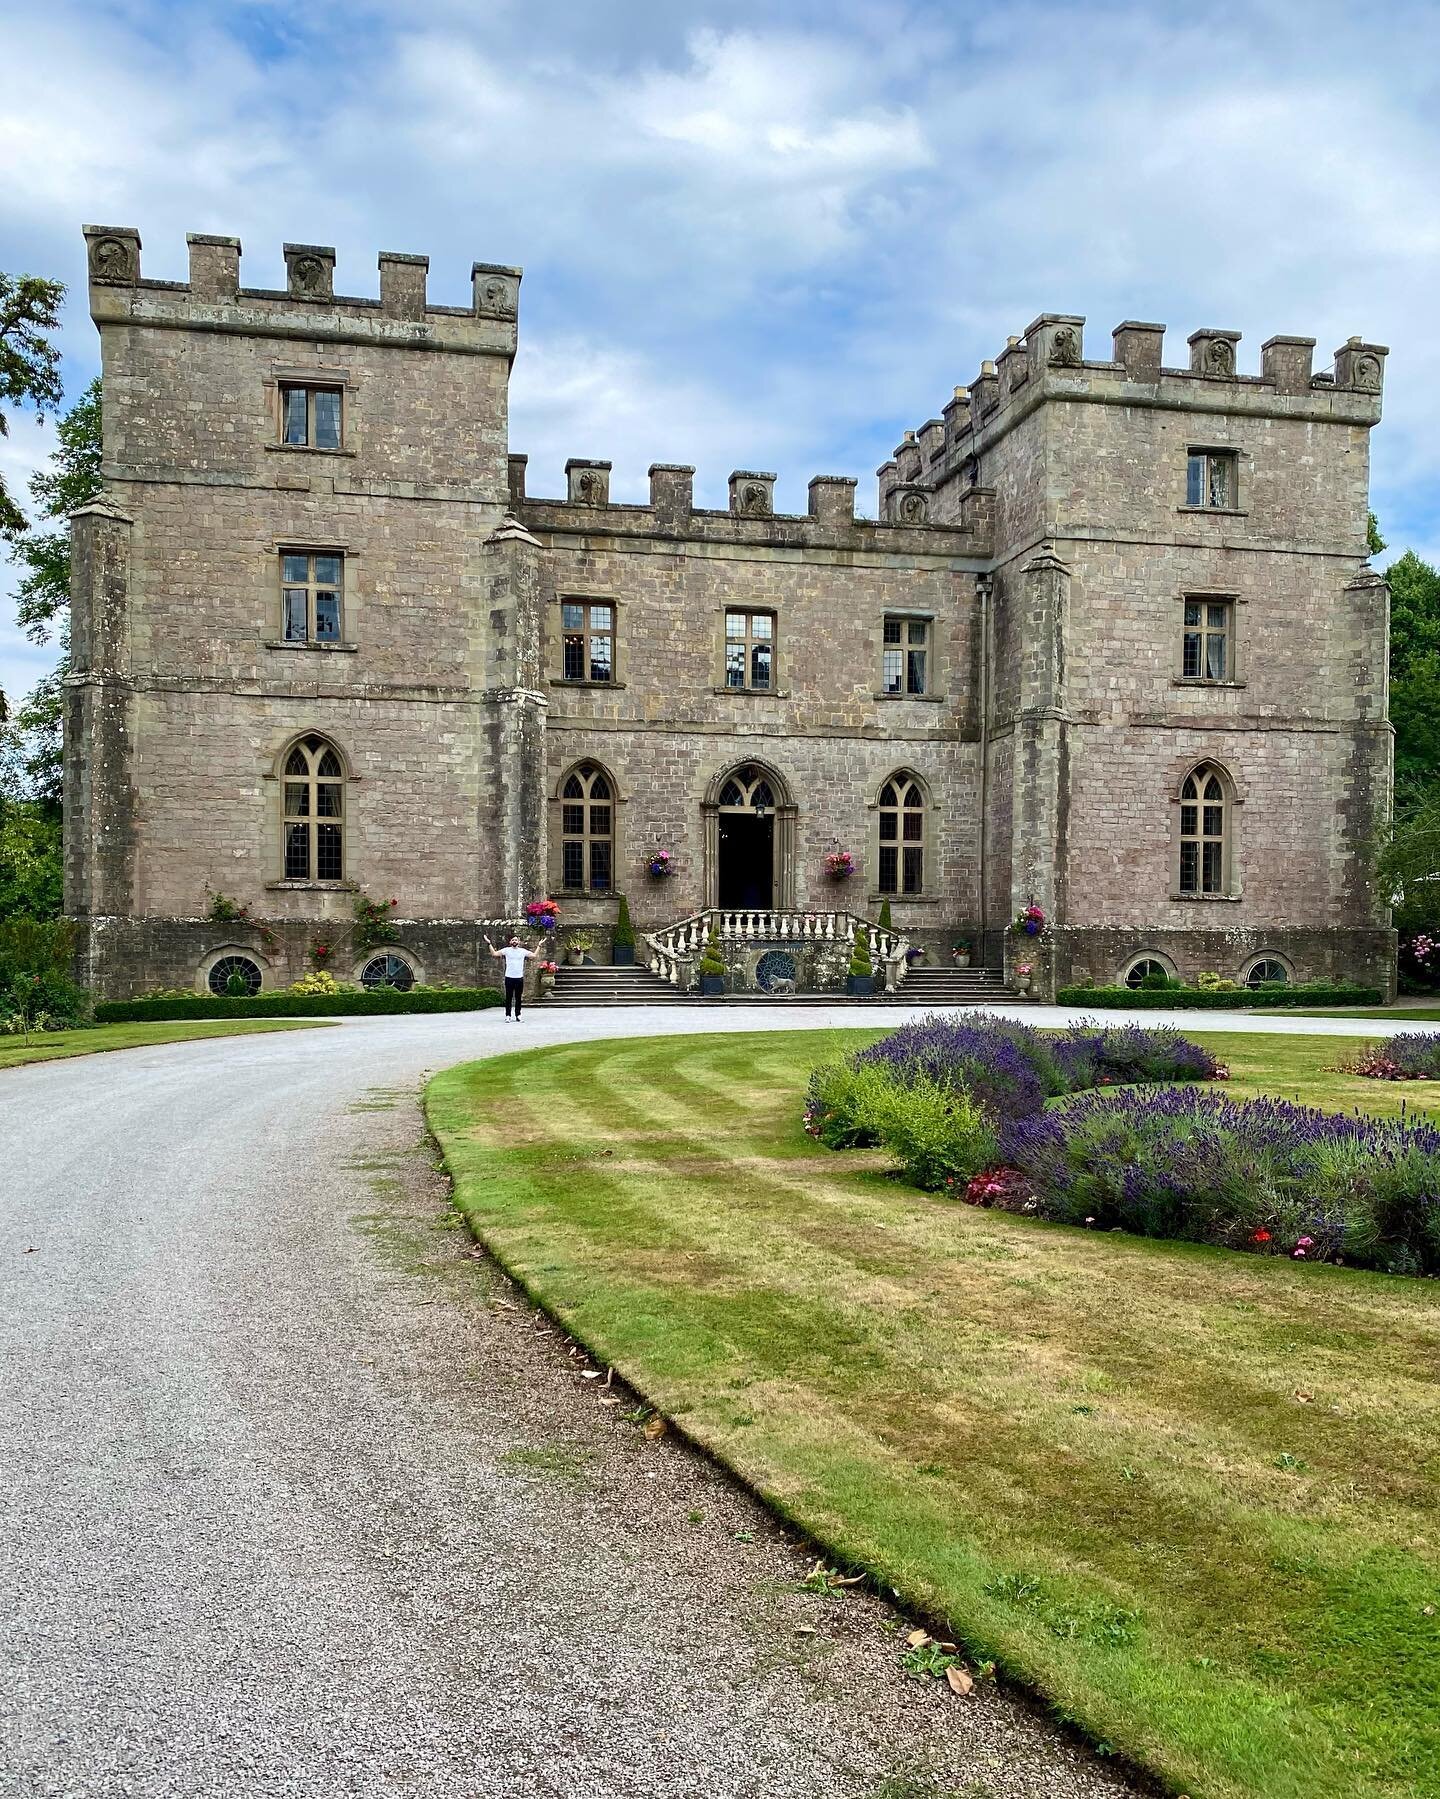 Looking forward to playing at this awesome venue tonight for Emma &amp; Gwyn&rsquo;s wedding! 

#wedding #weddingband #rockit #rockitband #clearwellcastle